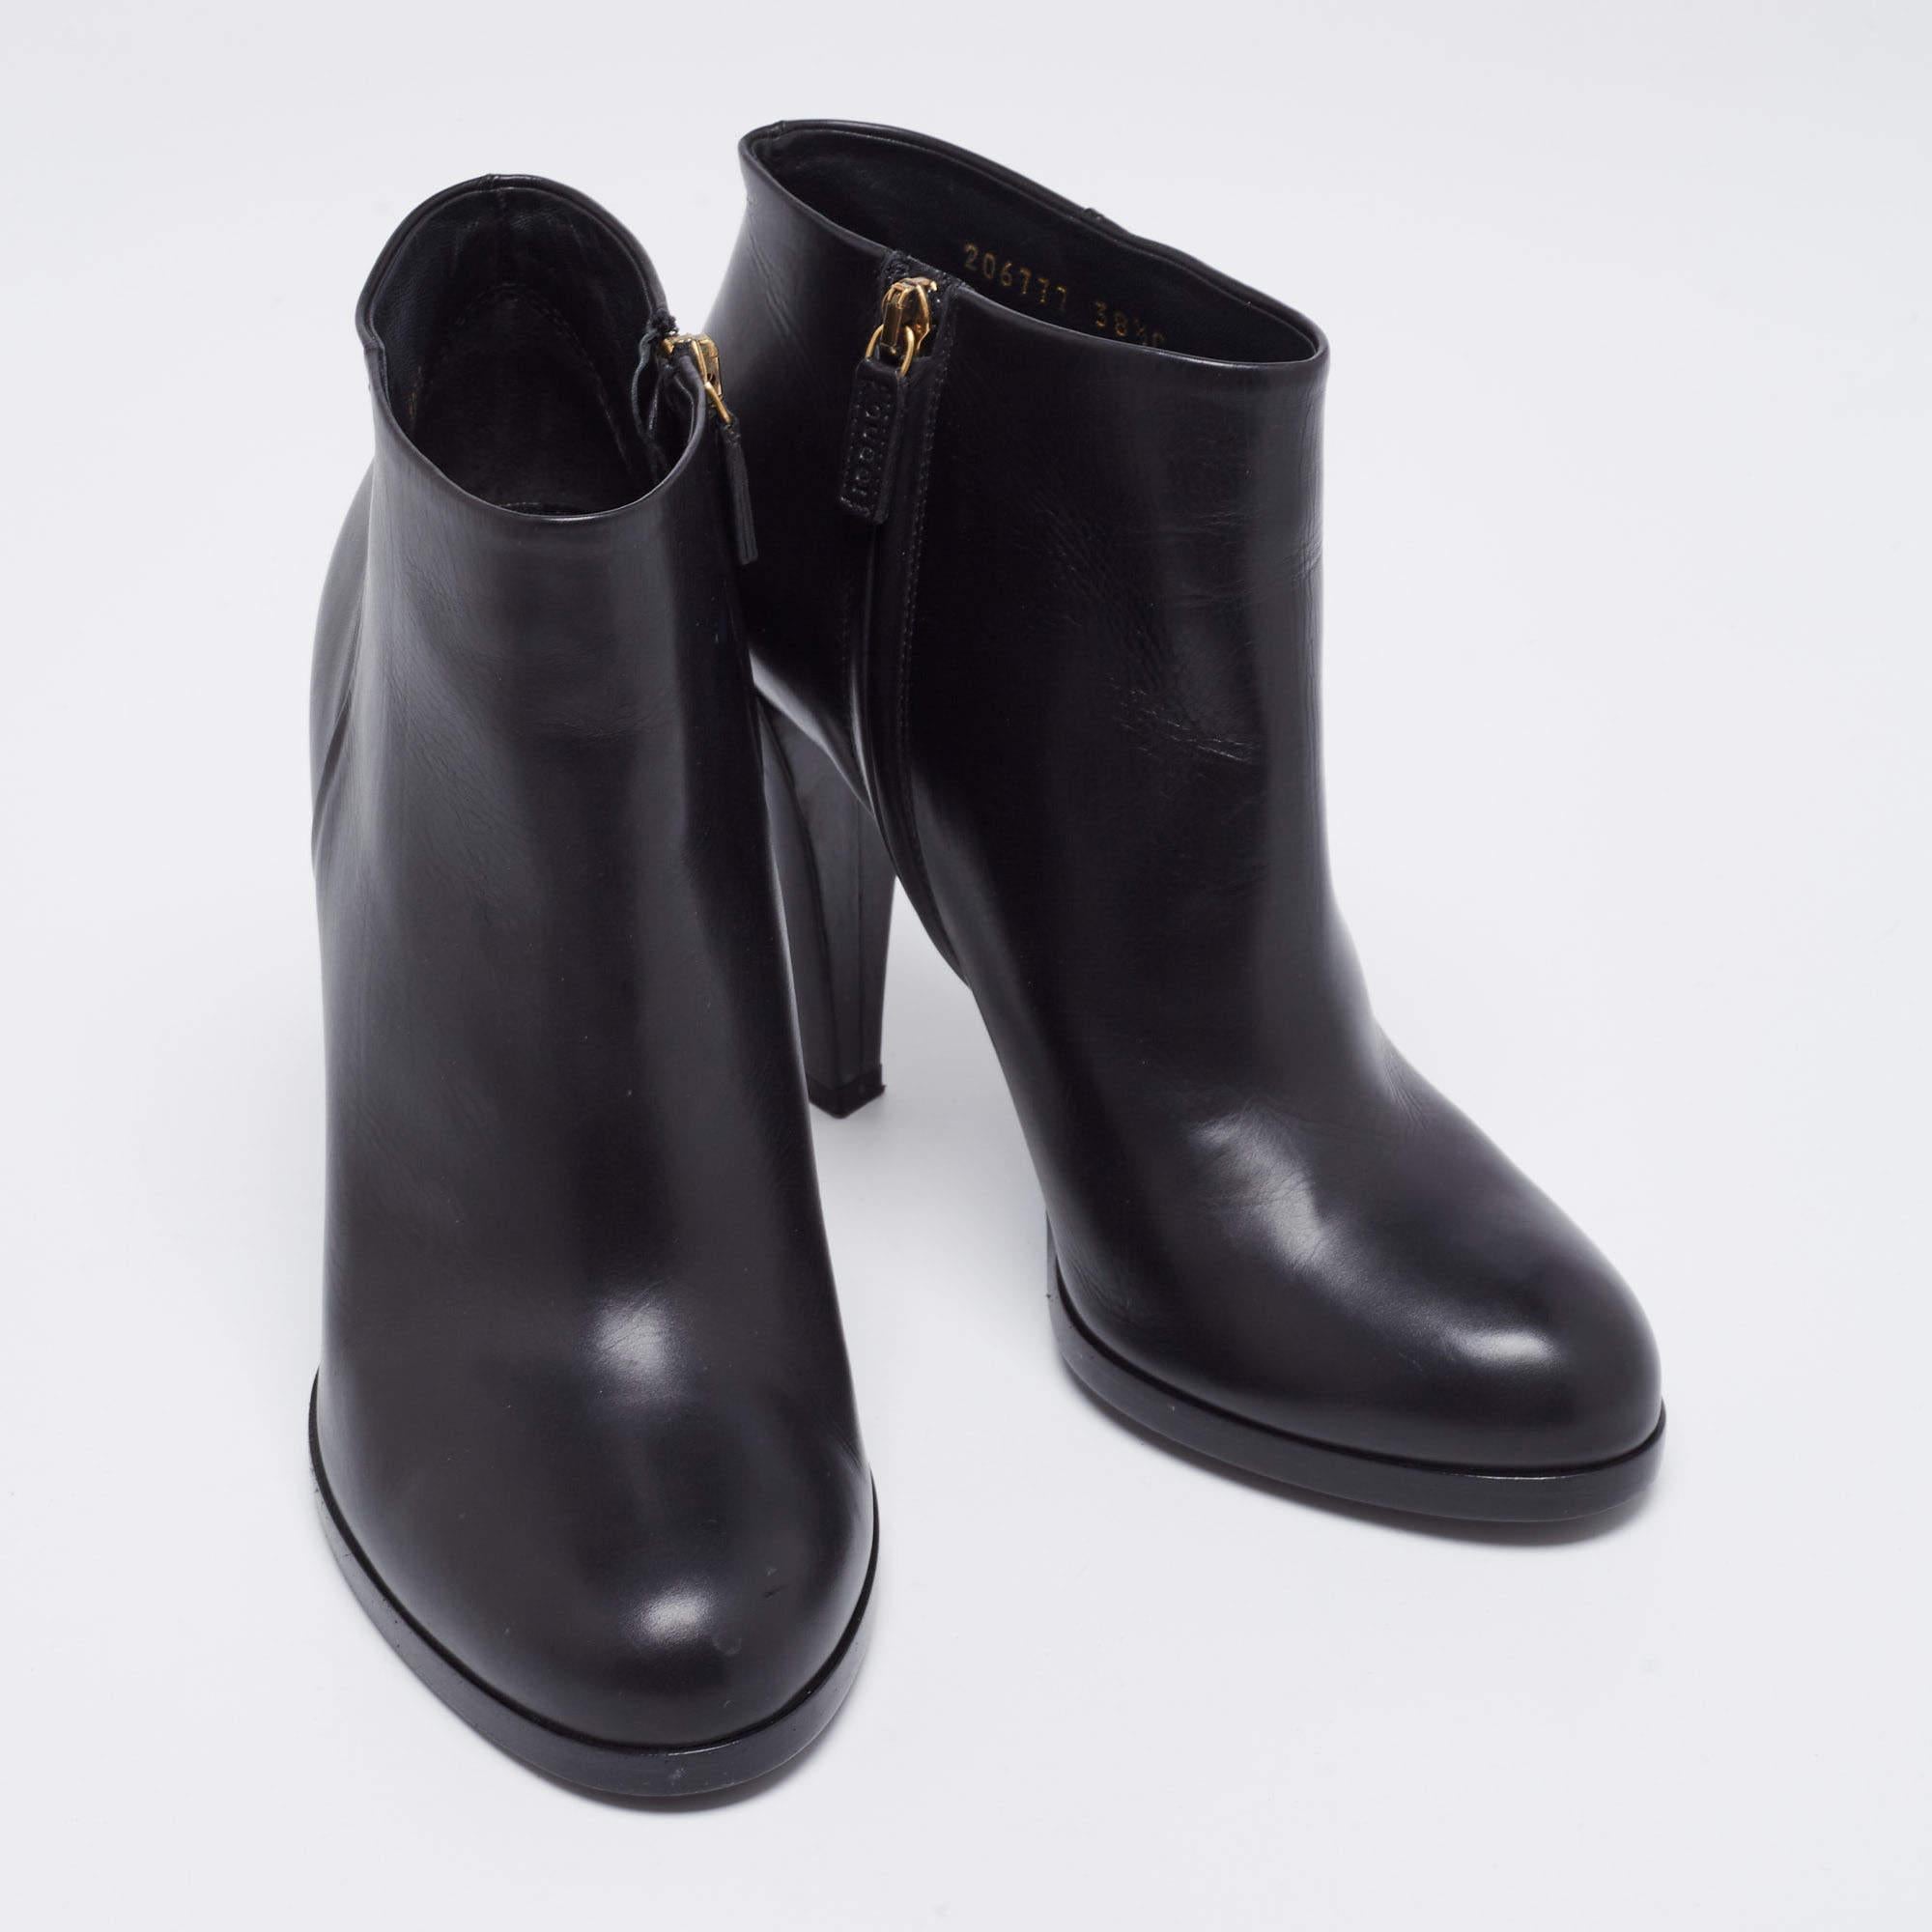 The House of Gucci brings refinement and gracefulness to your wardrobe with these stunning boots. They are made from black leather into an ankle-length silhouette. They flaunt zipper fastening, gold-tone hardware, and block heels. Make your attire